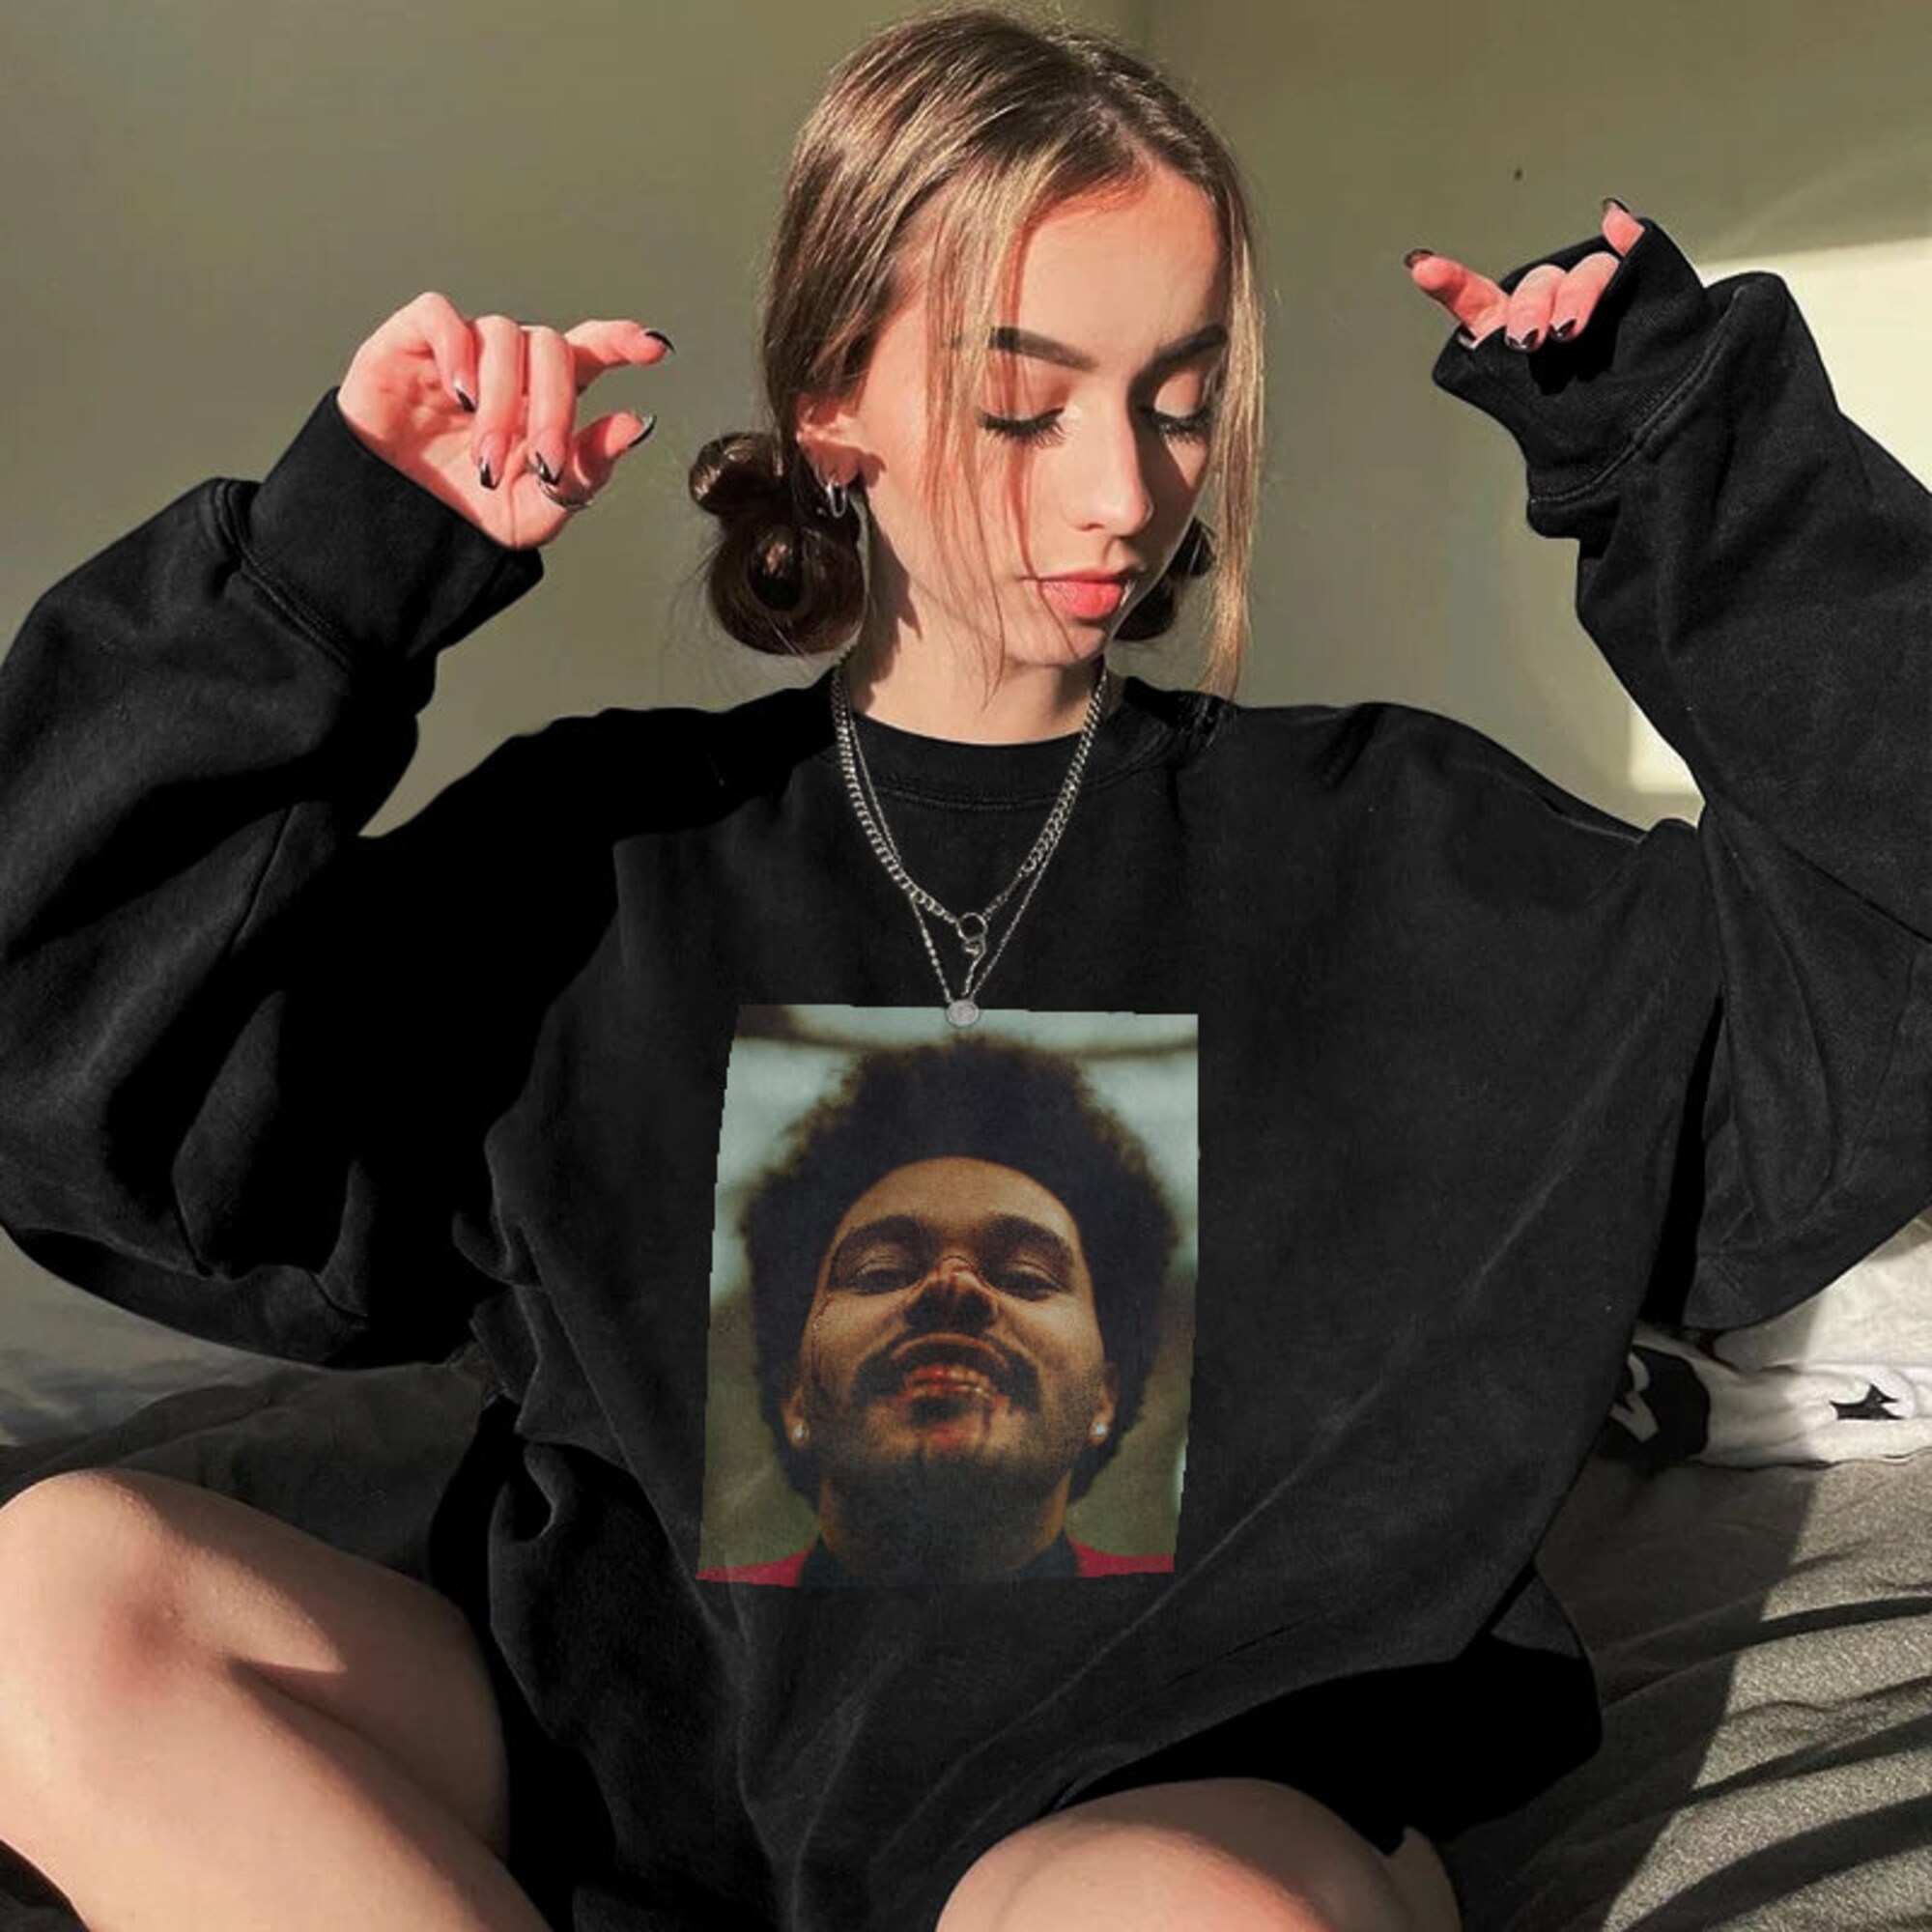 Discover The Weeknd Shirt, The Weeknd After Hours Til Dawn Sweatshirt, The Weeknd Concert 2022 Shirt, The Weeknd Tour 2022 Shirt, Gift For Fans